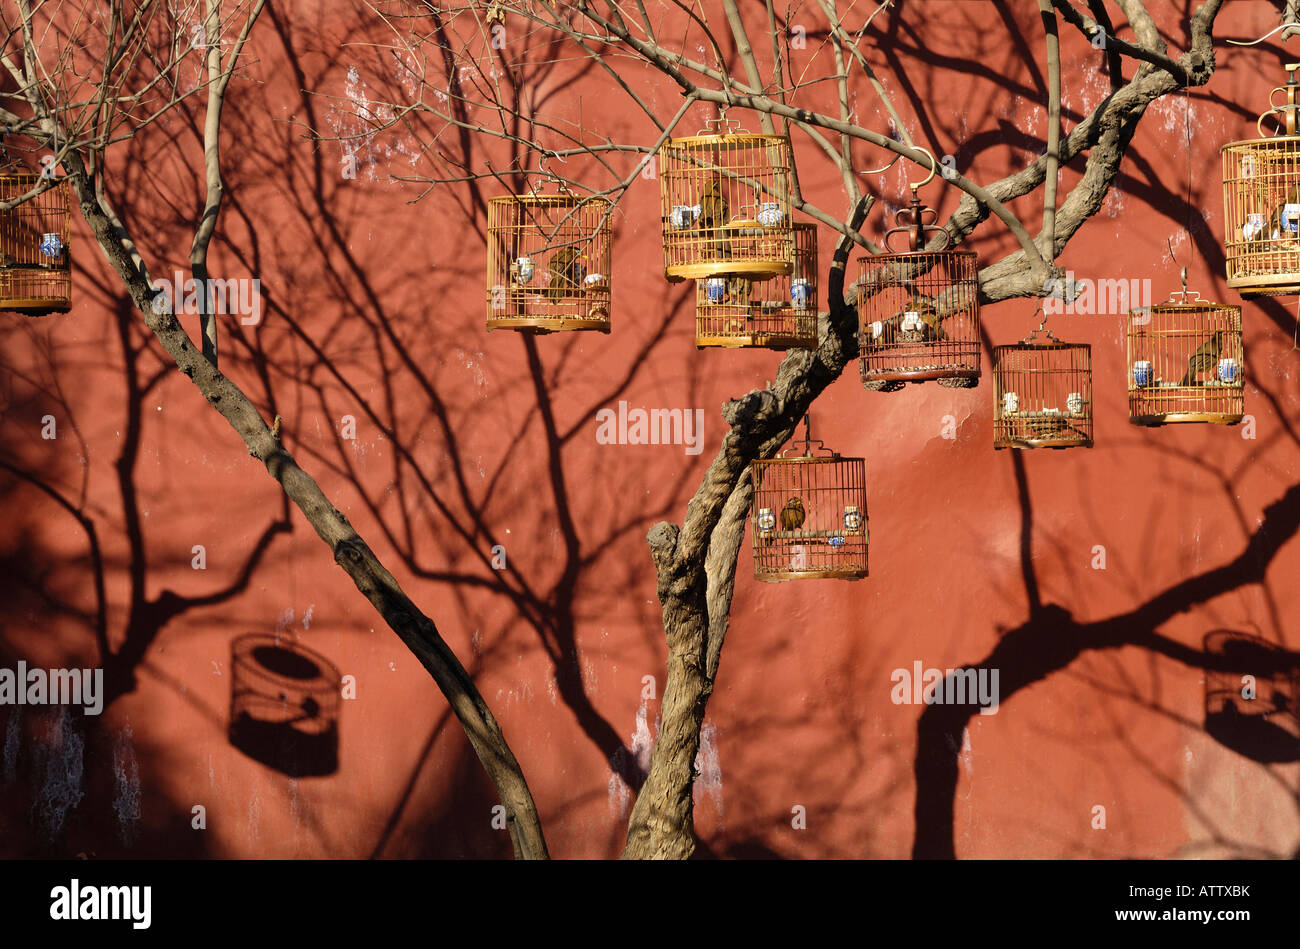 Caged birds in Beijing, China. 03-Mar-2008 Stock Photo